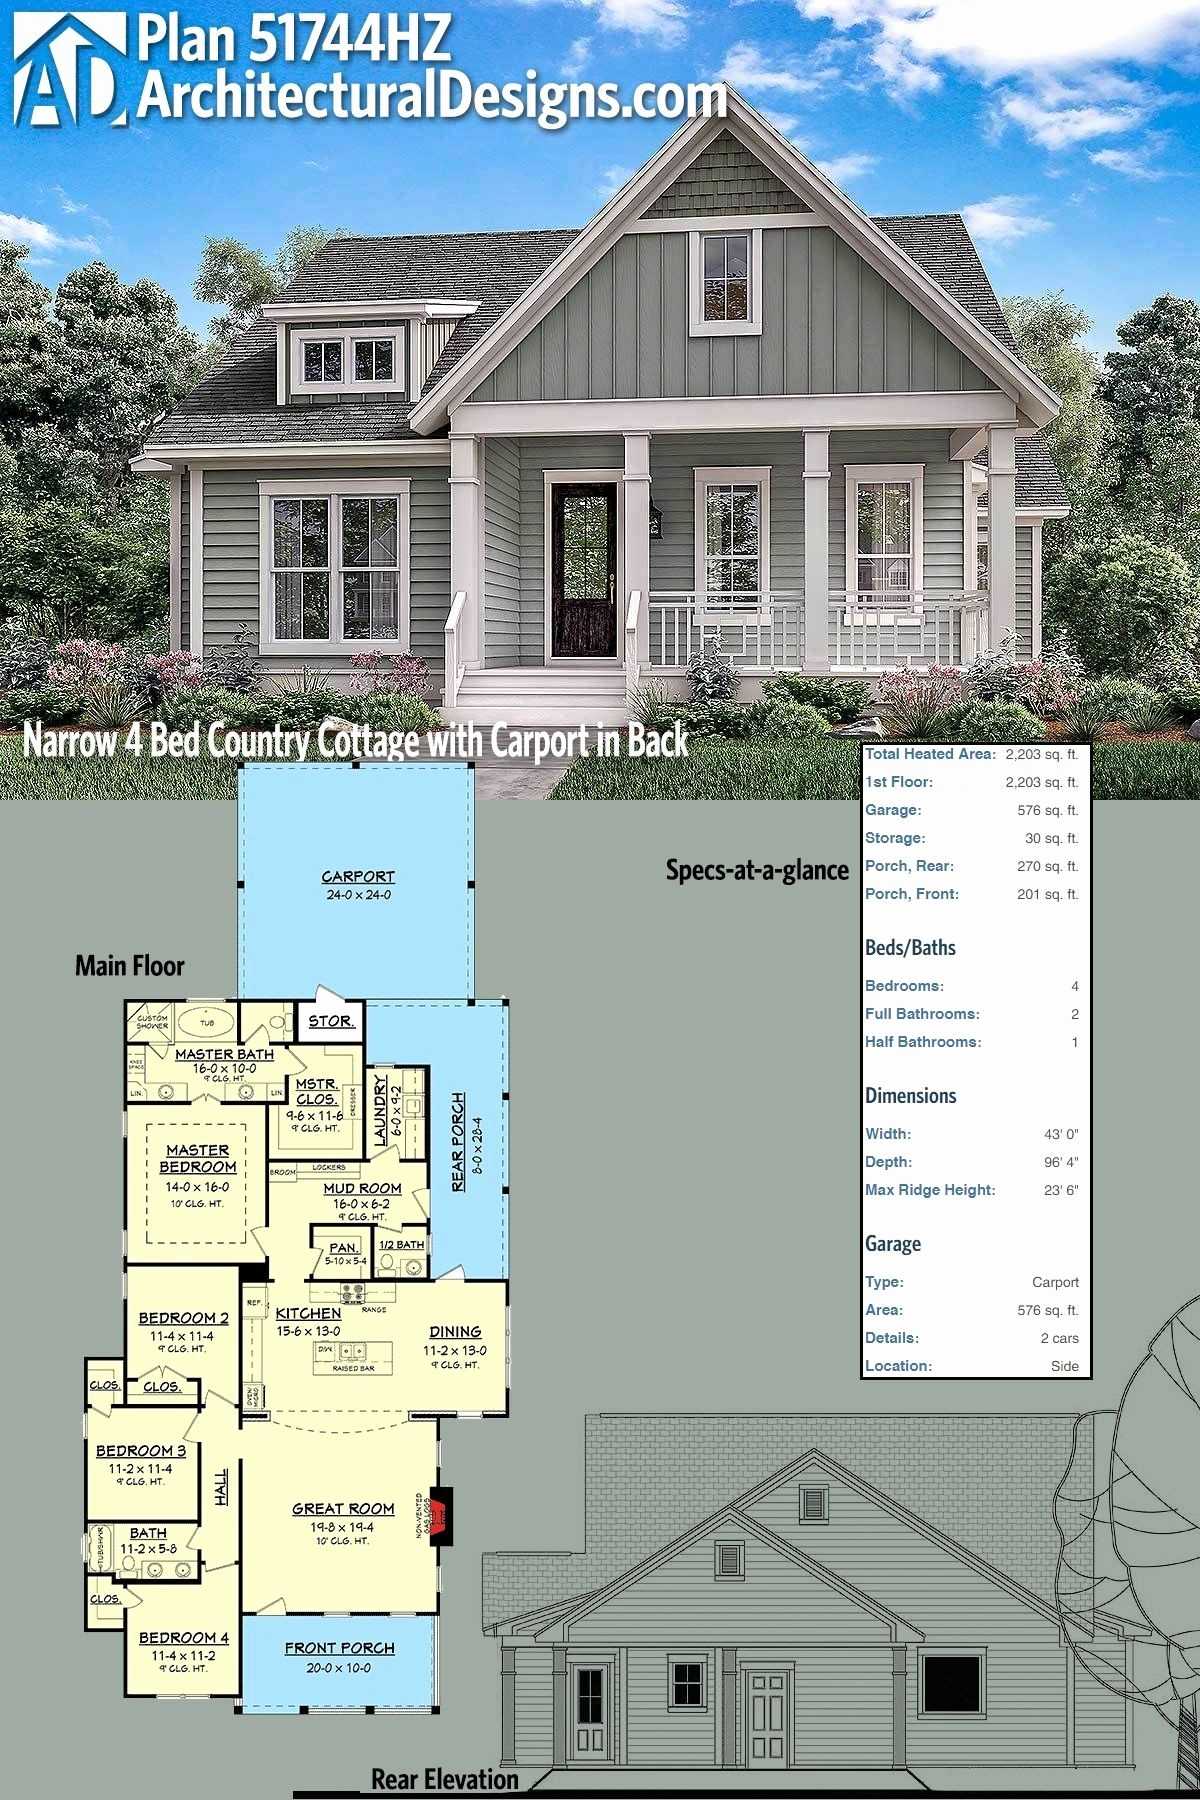 Single Family Dwelling Electrical Load Calculation Worksheet and Single Family Home Floor Plans 646 Best Floor Plans